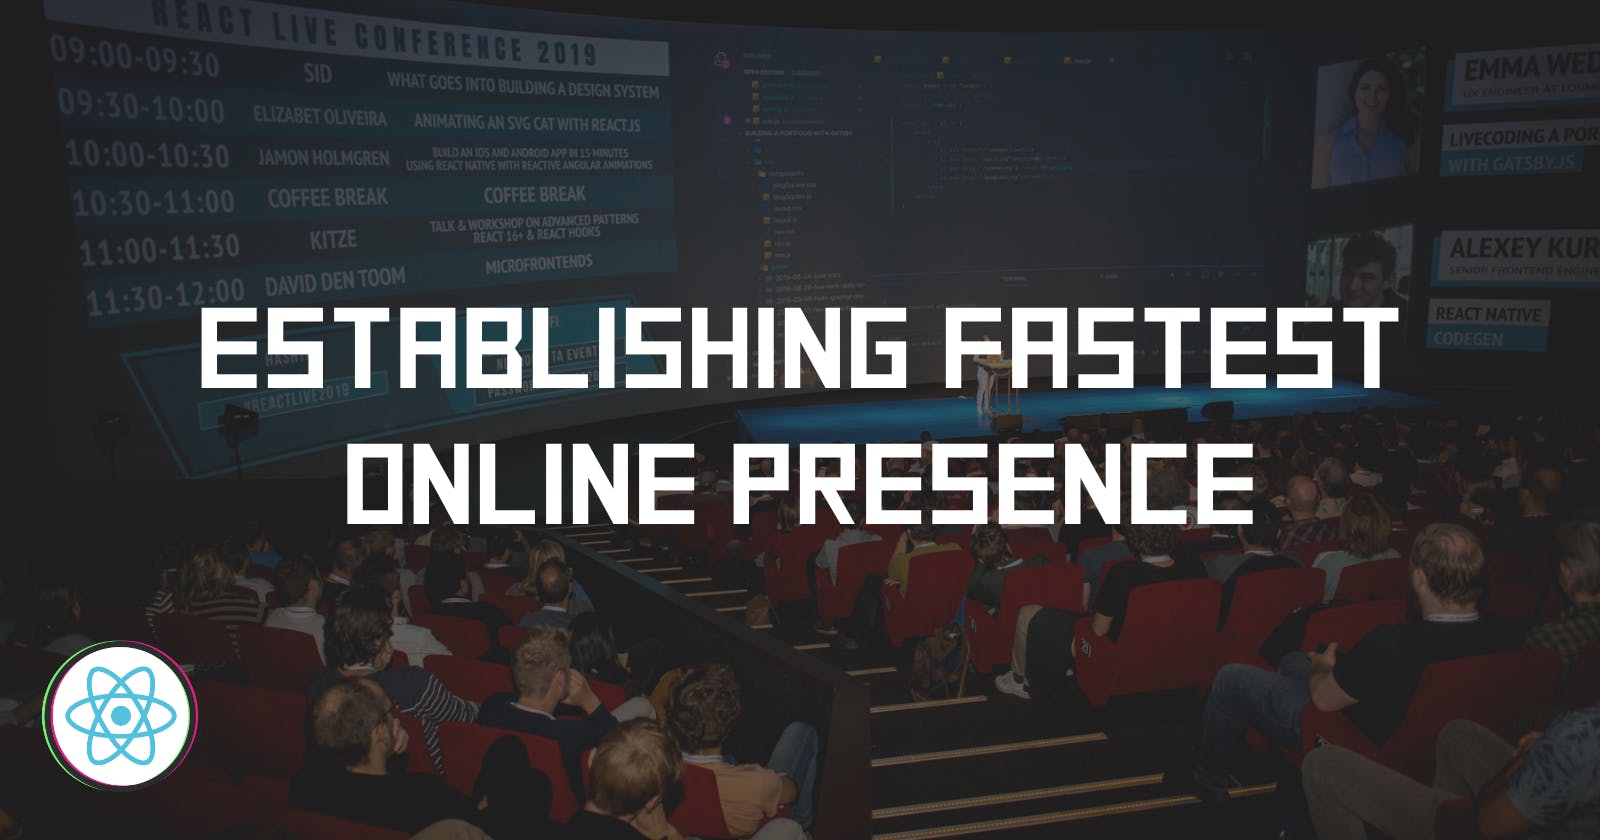 Establishing fastest online presence with Next.js, Storyblok and Layer0